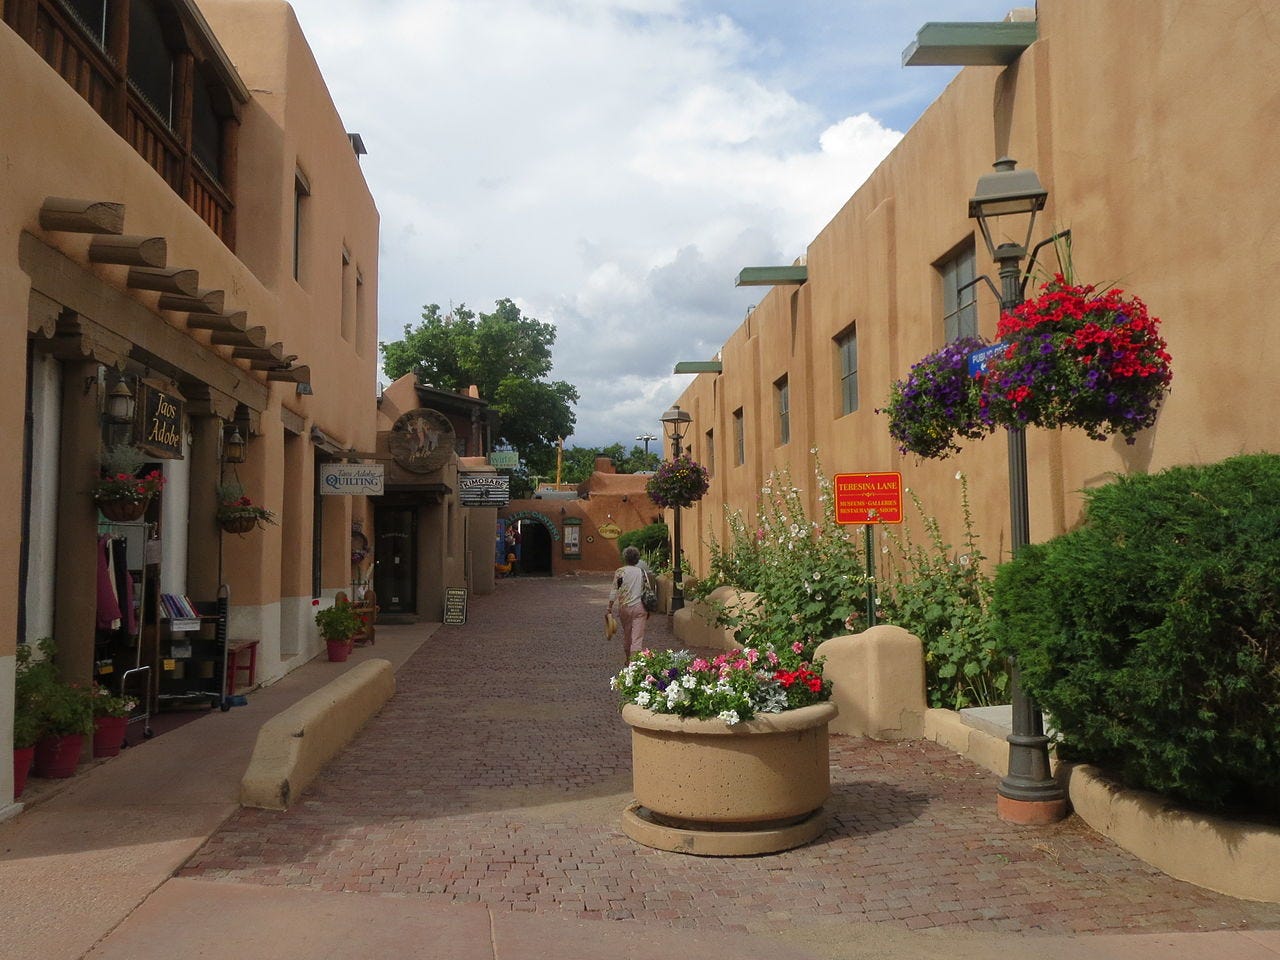 Alley off of the north side of the Taos Plaza with additional shops